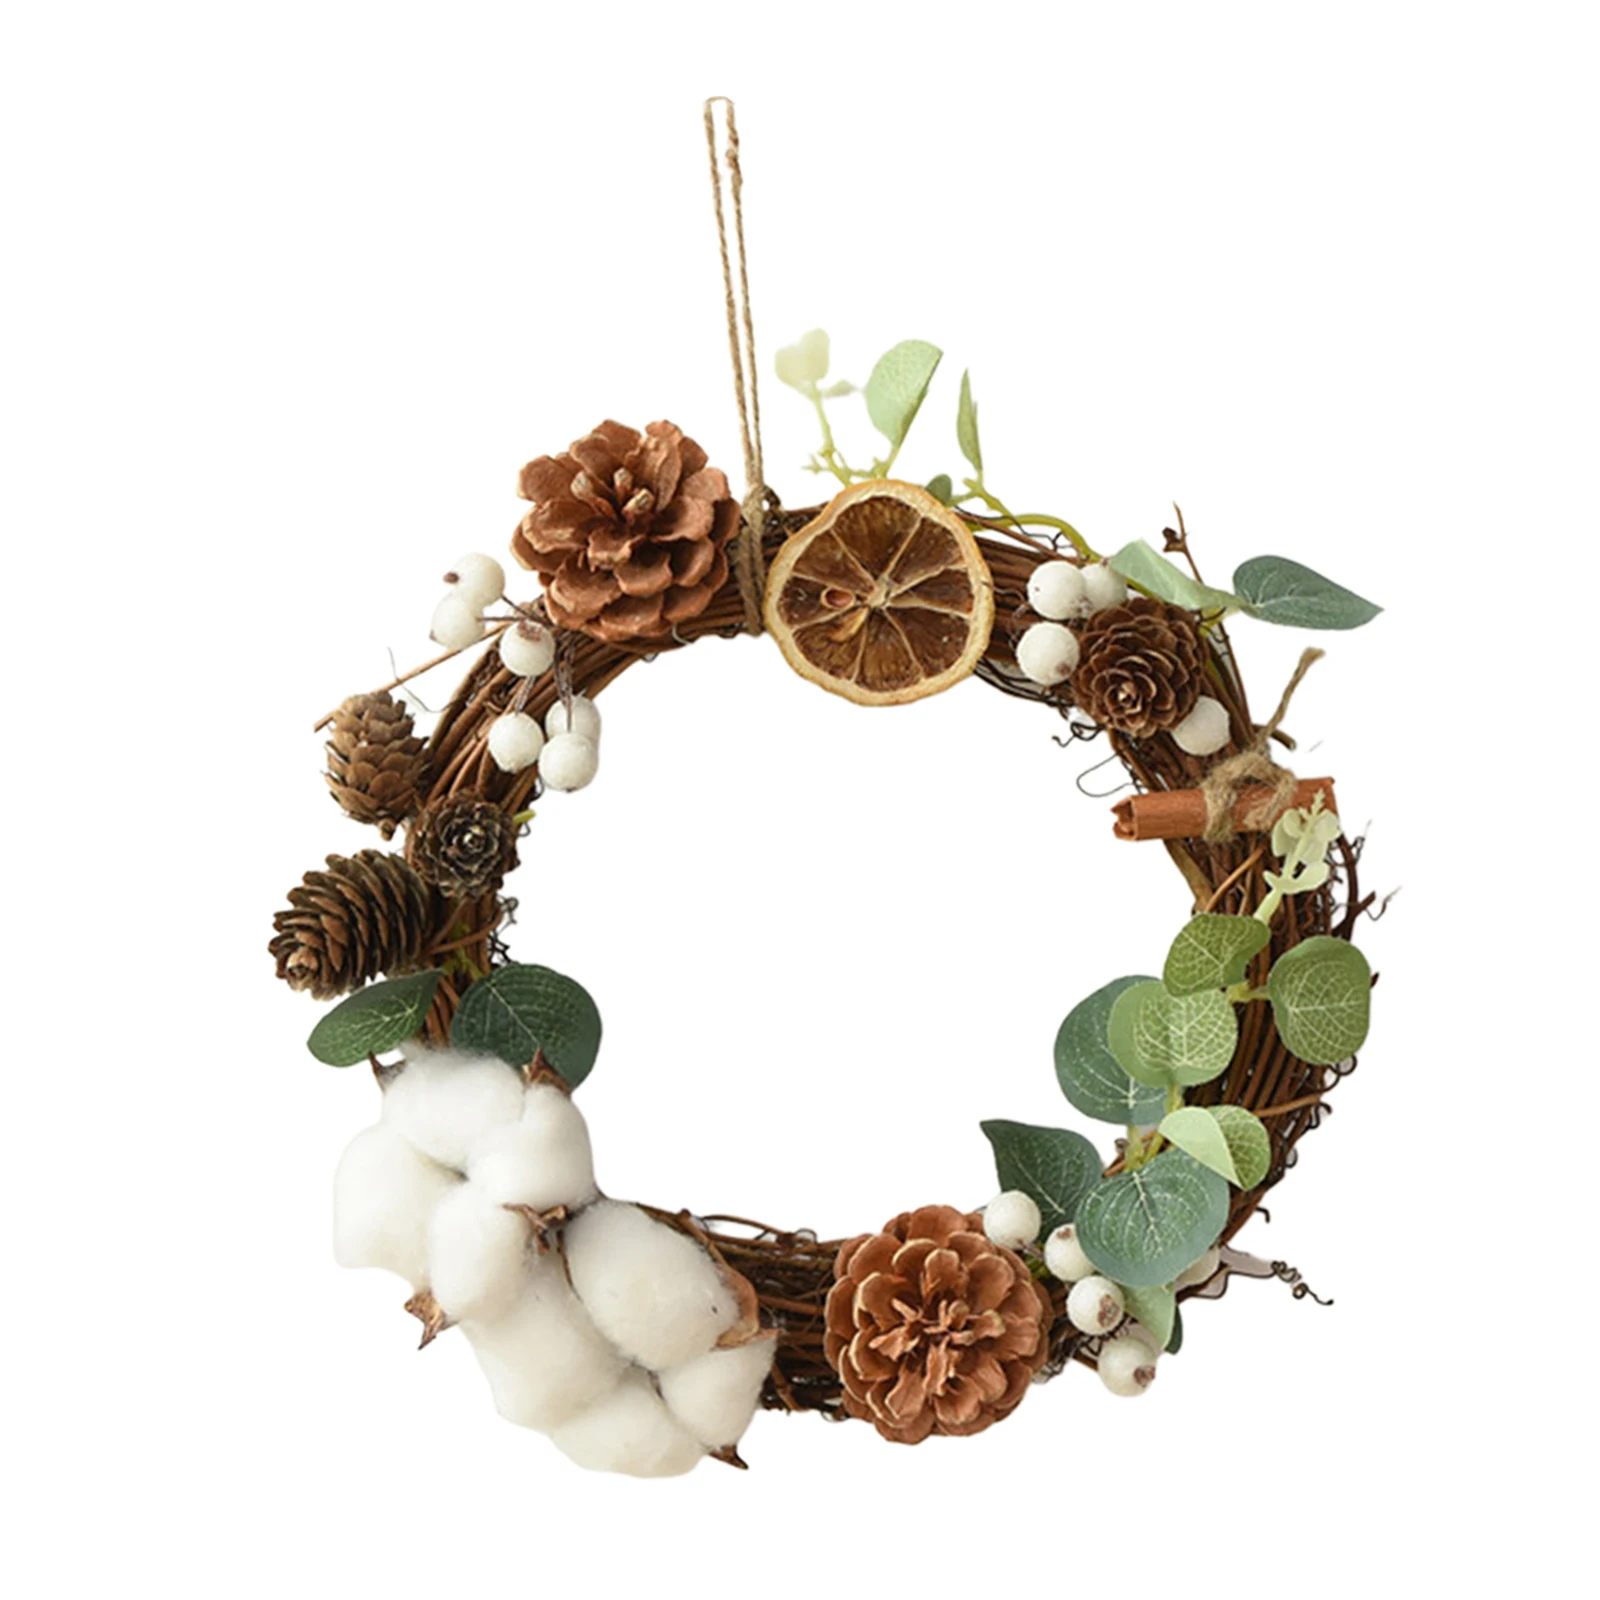 Mini 20cm Christmas Wreath Windows Natural Rattan Pine Cones Garland Decorative for Front Door Fireplace Party Wedding New Year